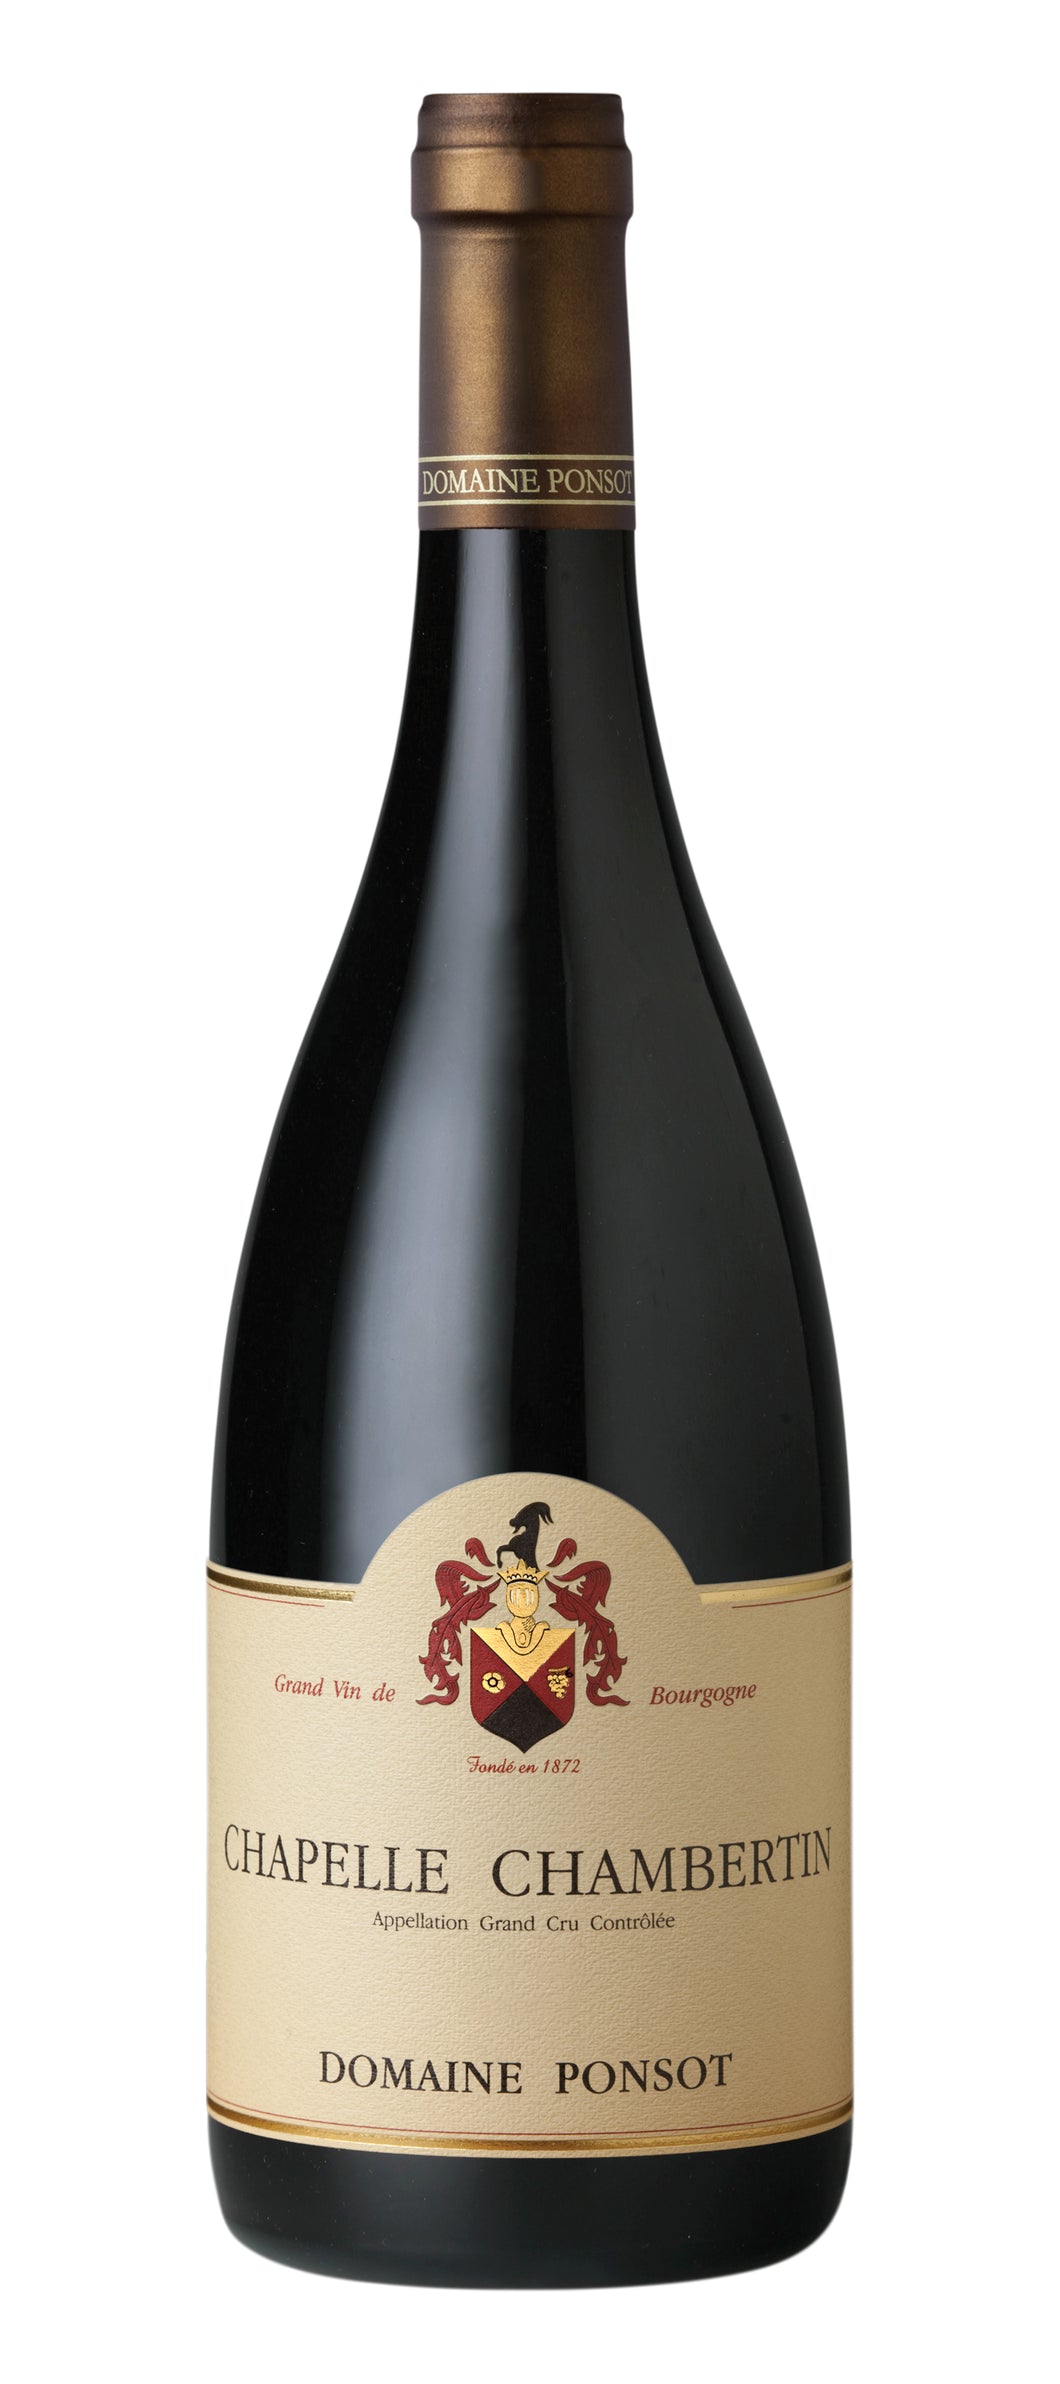 Domaine Ponsot<br />2014 Chapelle-Chambertin Grand Cru<br>France